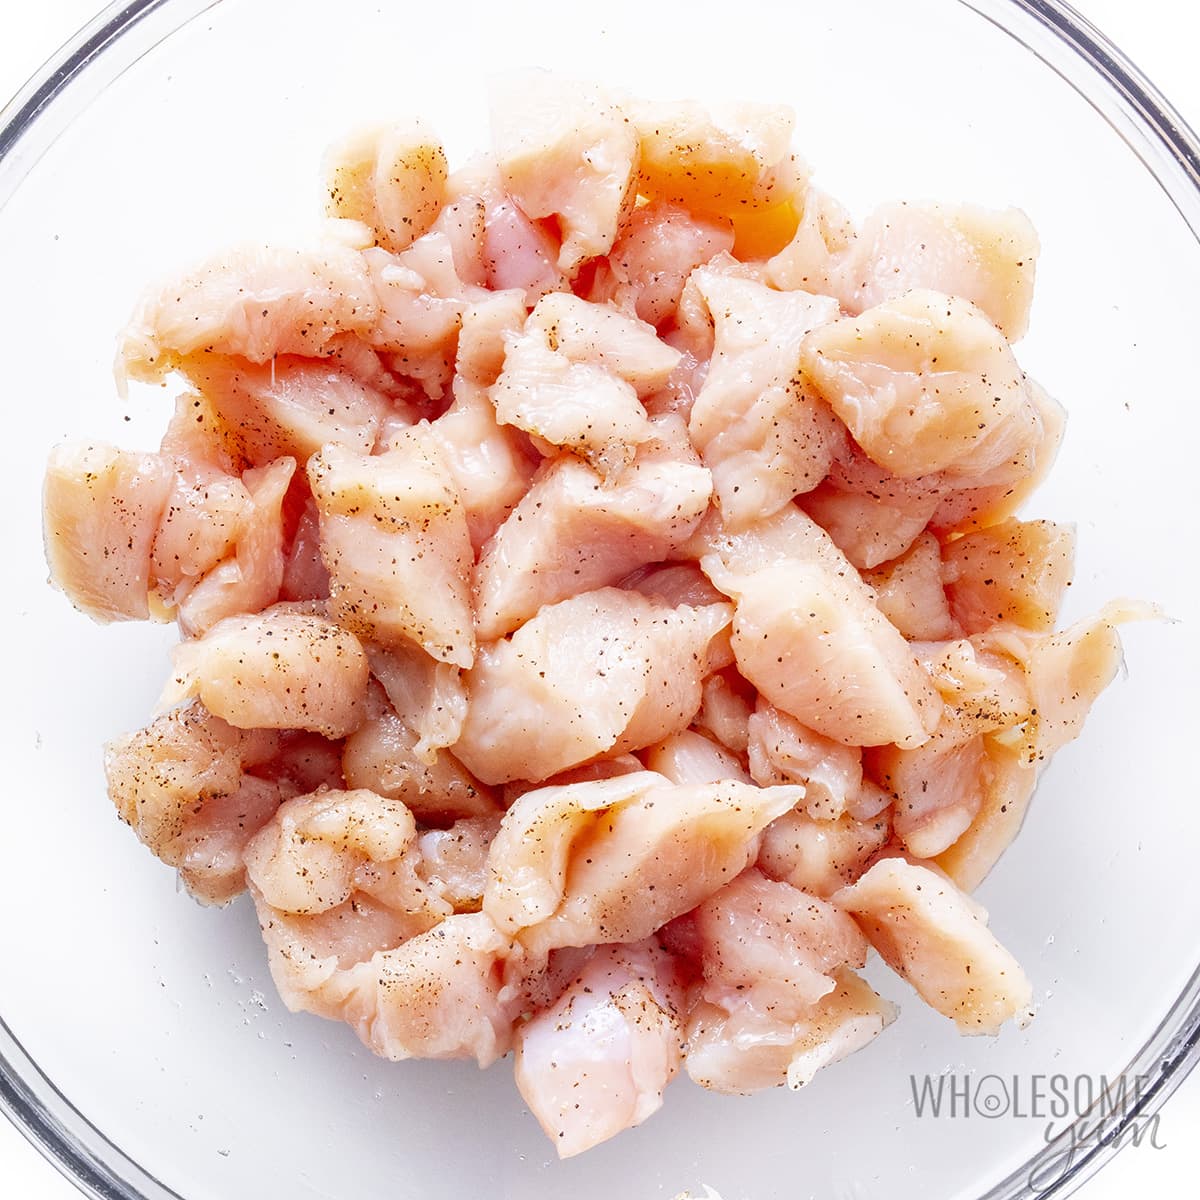 Chicken pieces in a bowl seasoned with salt and pepper.